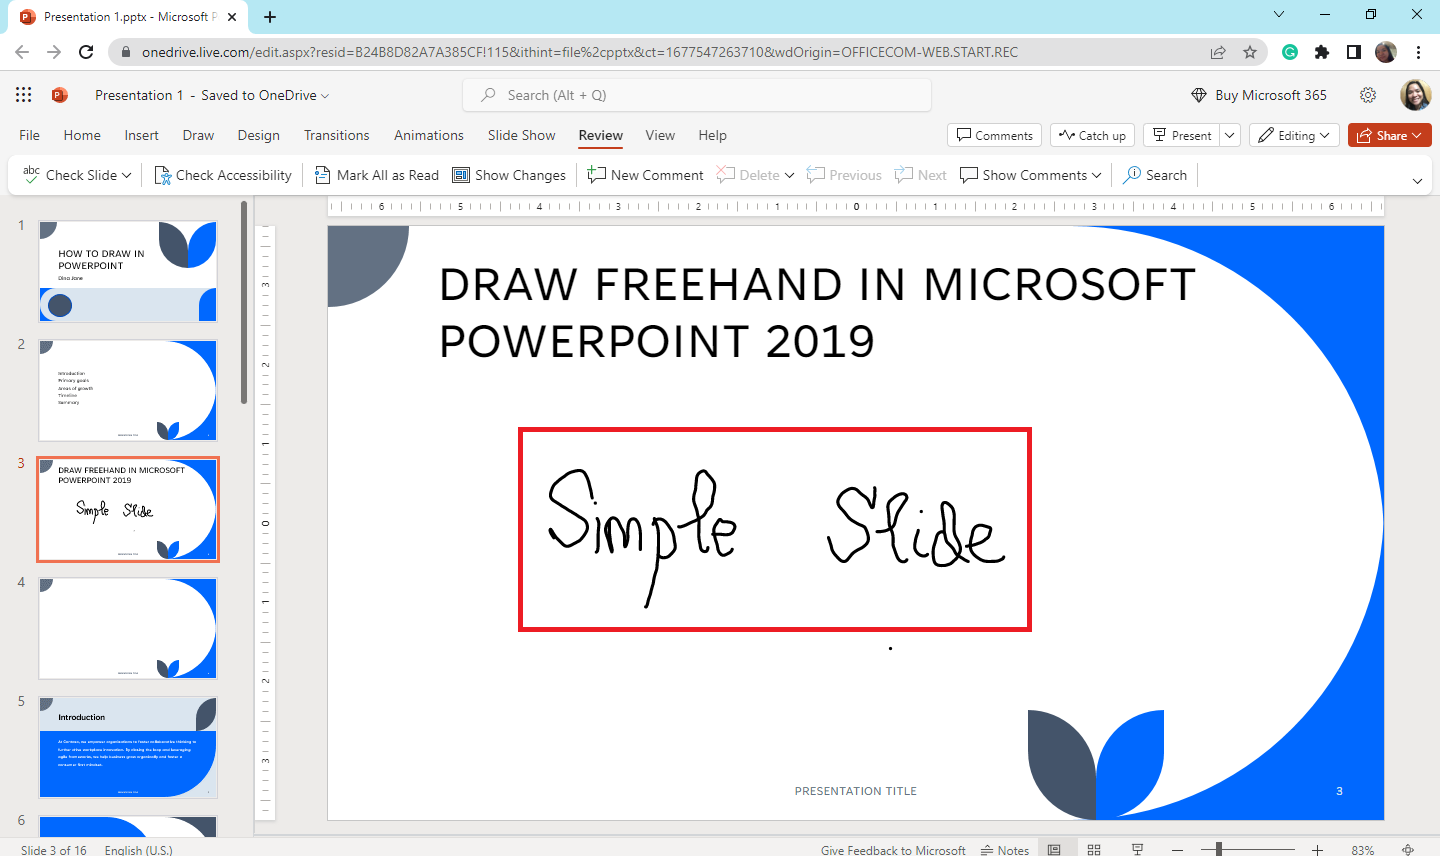 You can now draw freehand shapes in PowerPoint 2019.